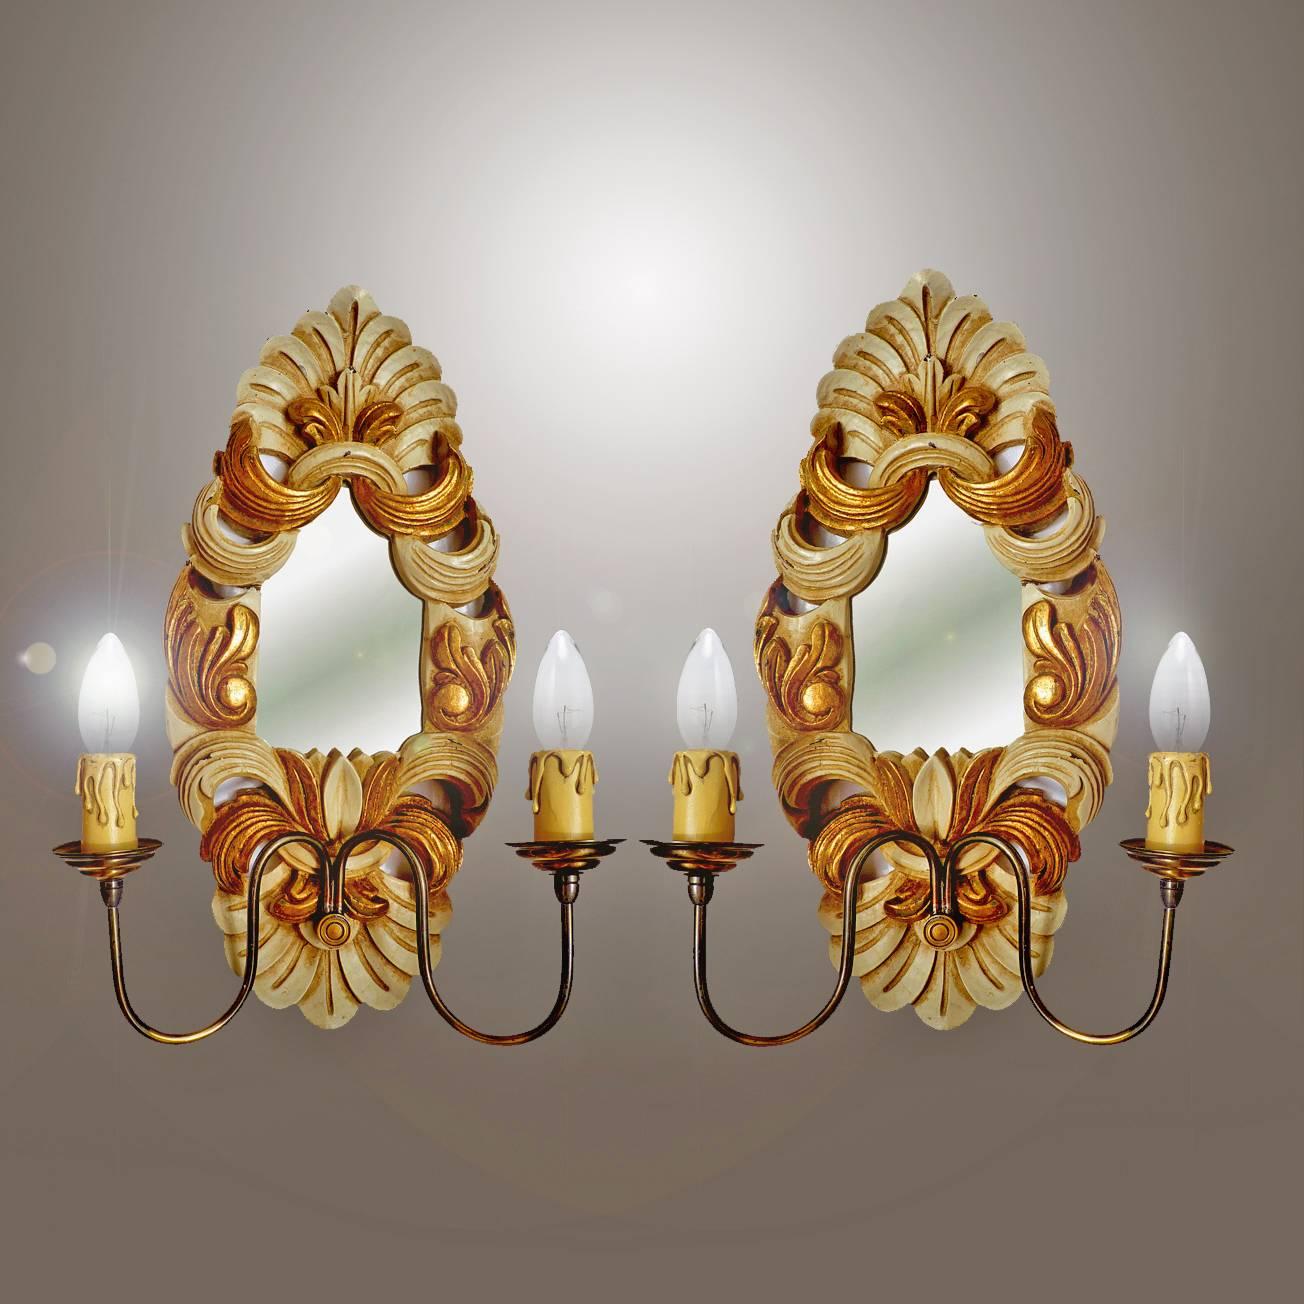 Antique 1950s pair of giltwood French double light mirrored back wall sconces or girandoles
Measures:
Height 17.71 in. (45 cm)
Width 11.81 in. (30 cm)
Depth 4.33 in. (11 cm)
Weight 4.5 lb. (2 kg).

